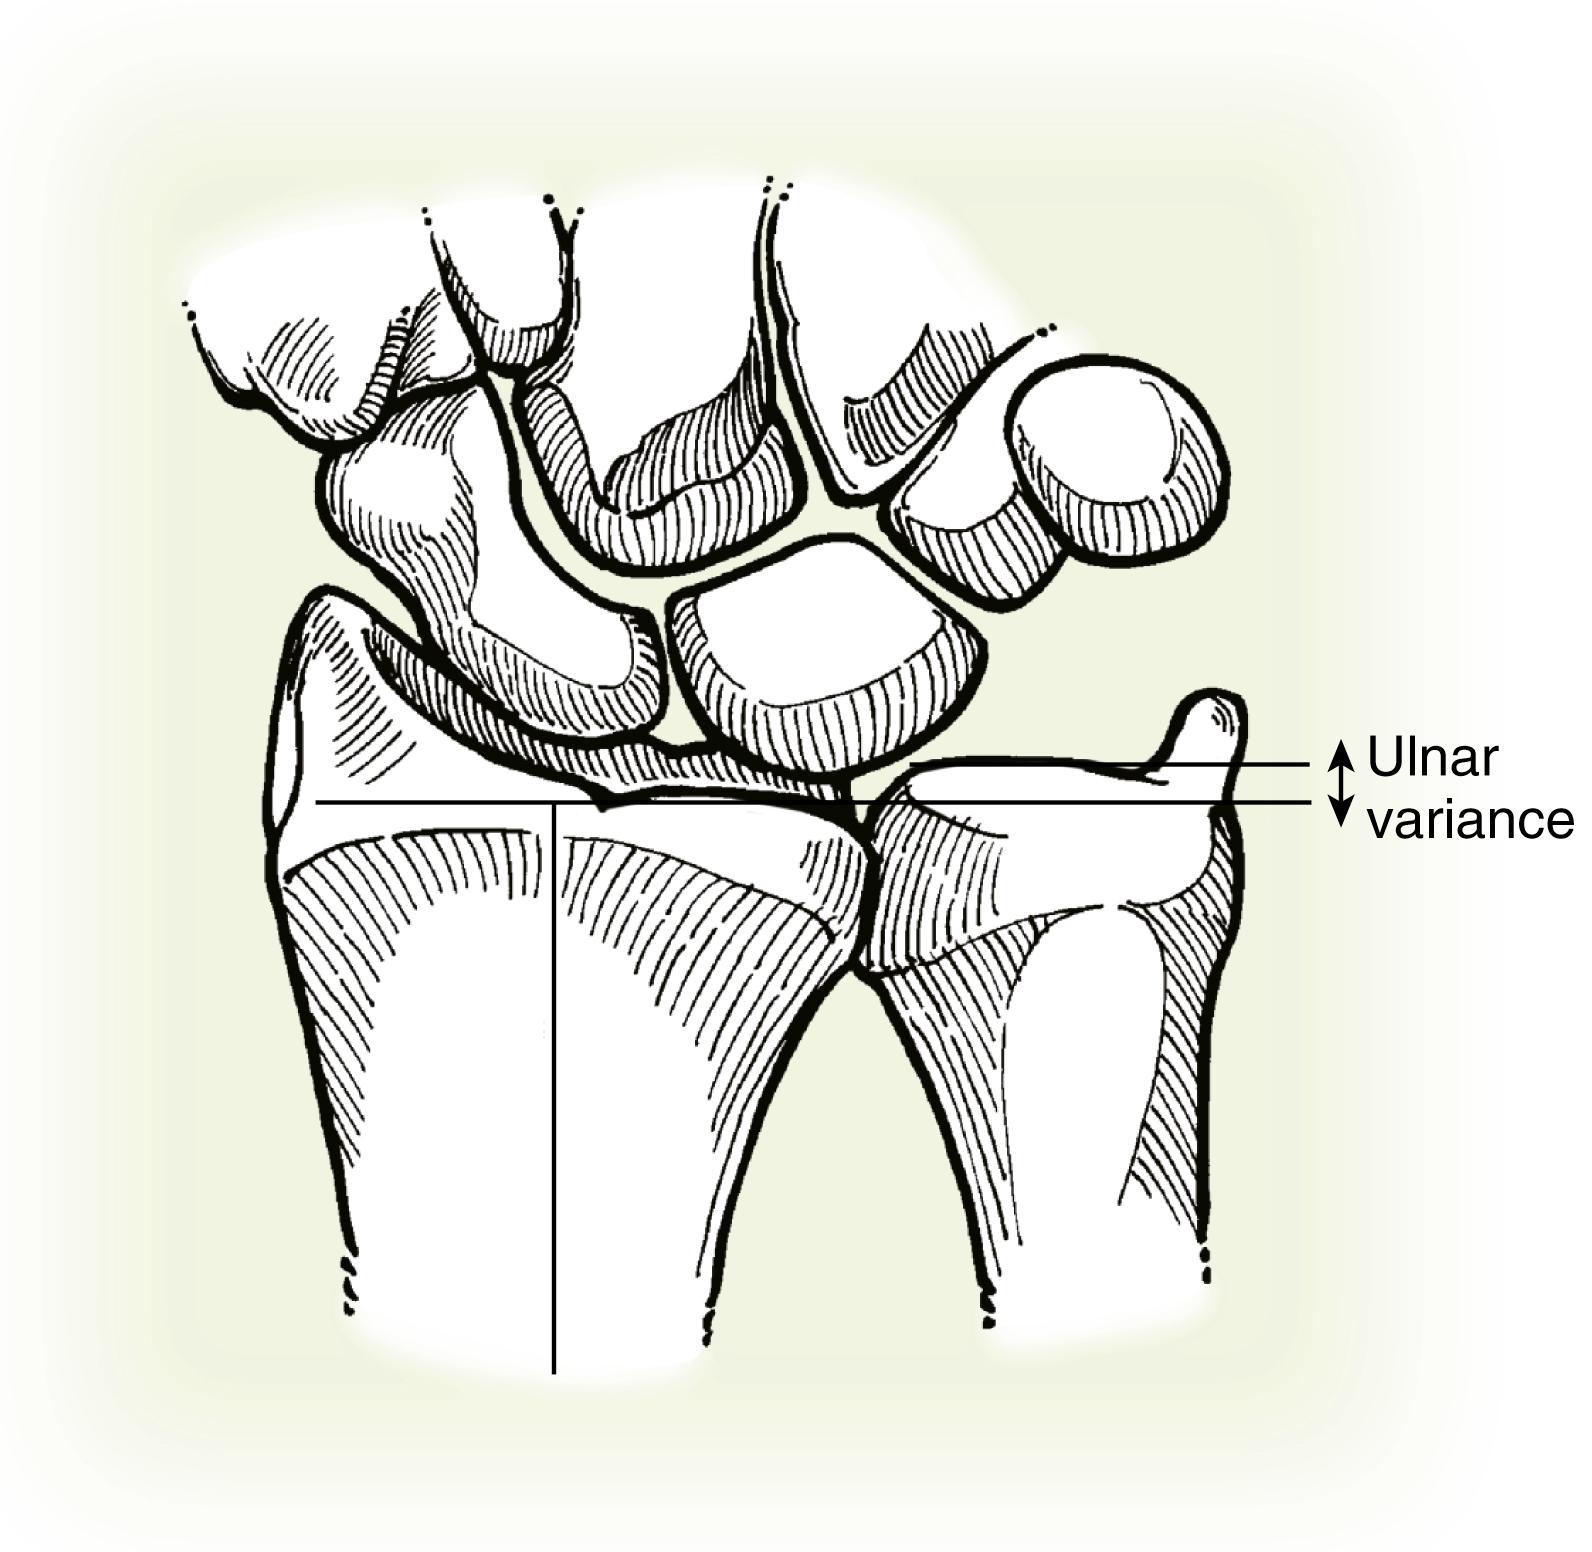 Fig. 14.10, Ulnar variance is measured by drawing a line through the volar sclerotic line of the distal radius perpendicular to its longitudinal axis. Variance is the distance between this line and the distal cortical rim of the ulnar dome.